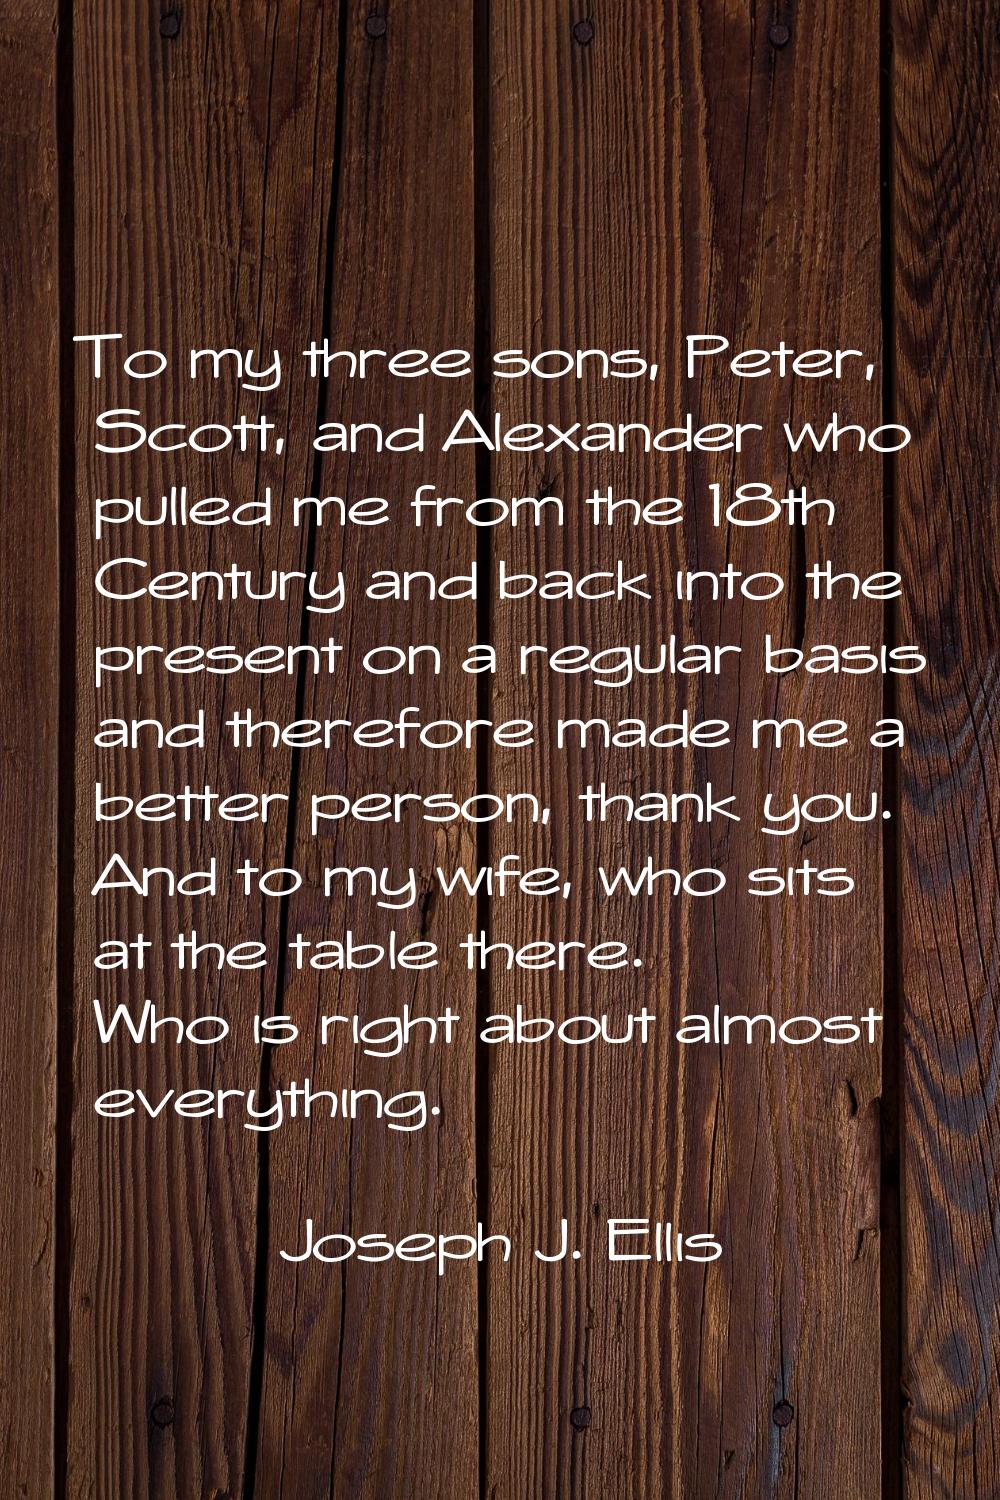 To my three sons, Peter, Scott, and Alexander who pulled me from the 18th Century and back into the